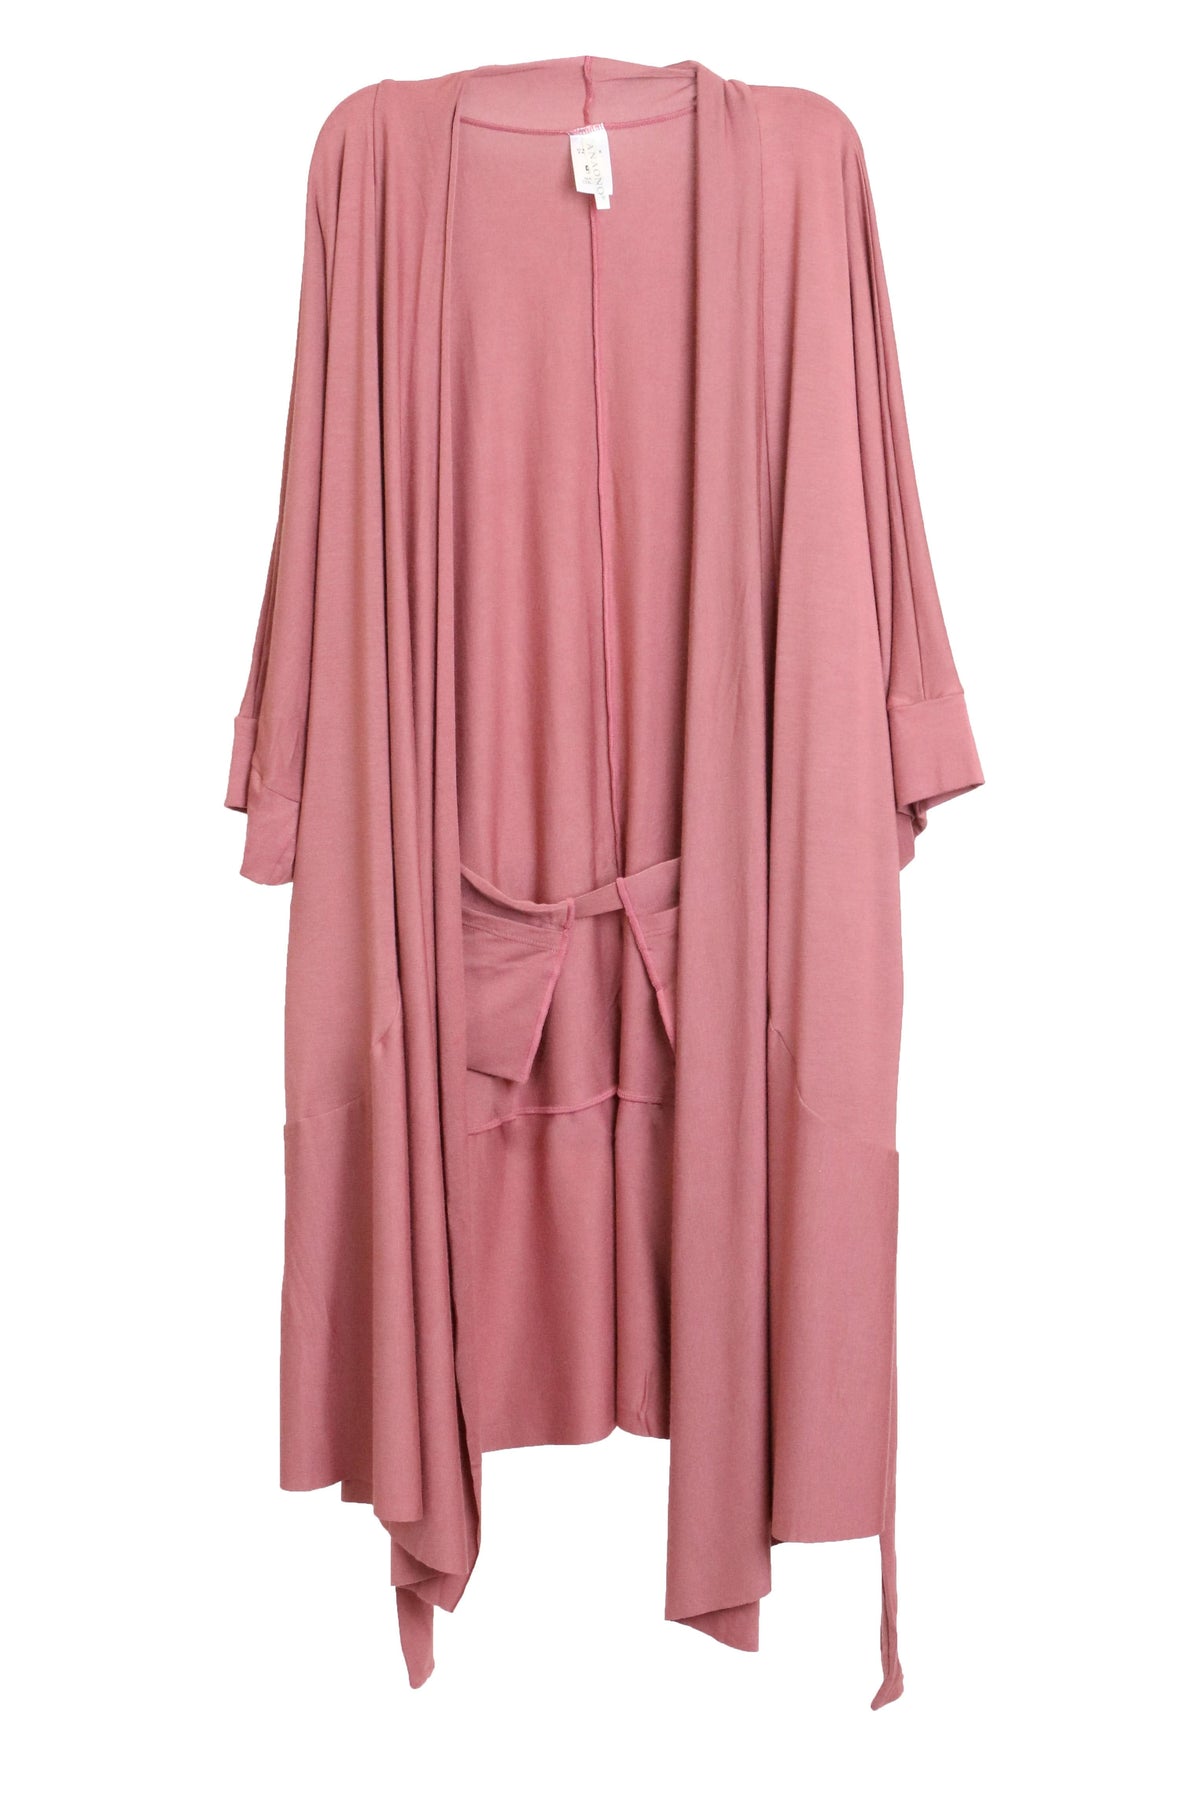 AnaOno Robe Dusty Rose / One Size Miena Robe with Drain Management Belt - Dusty Robe